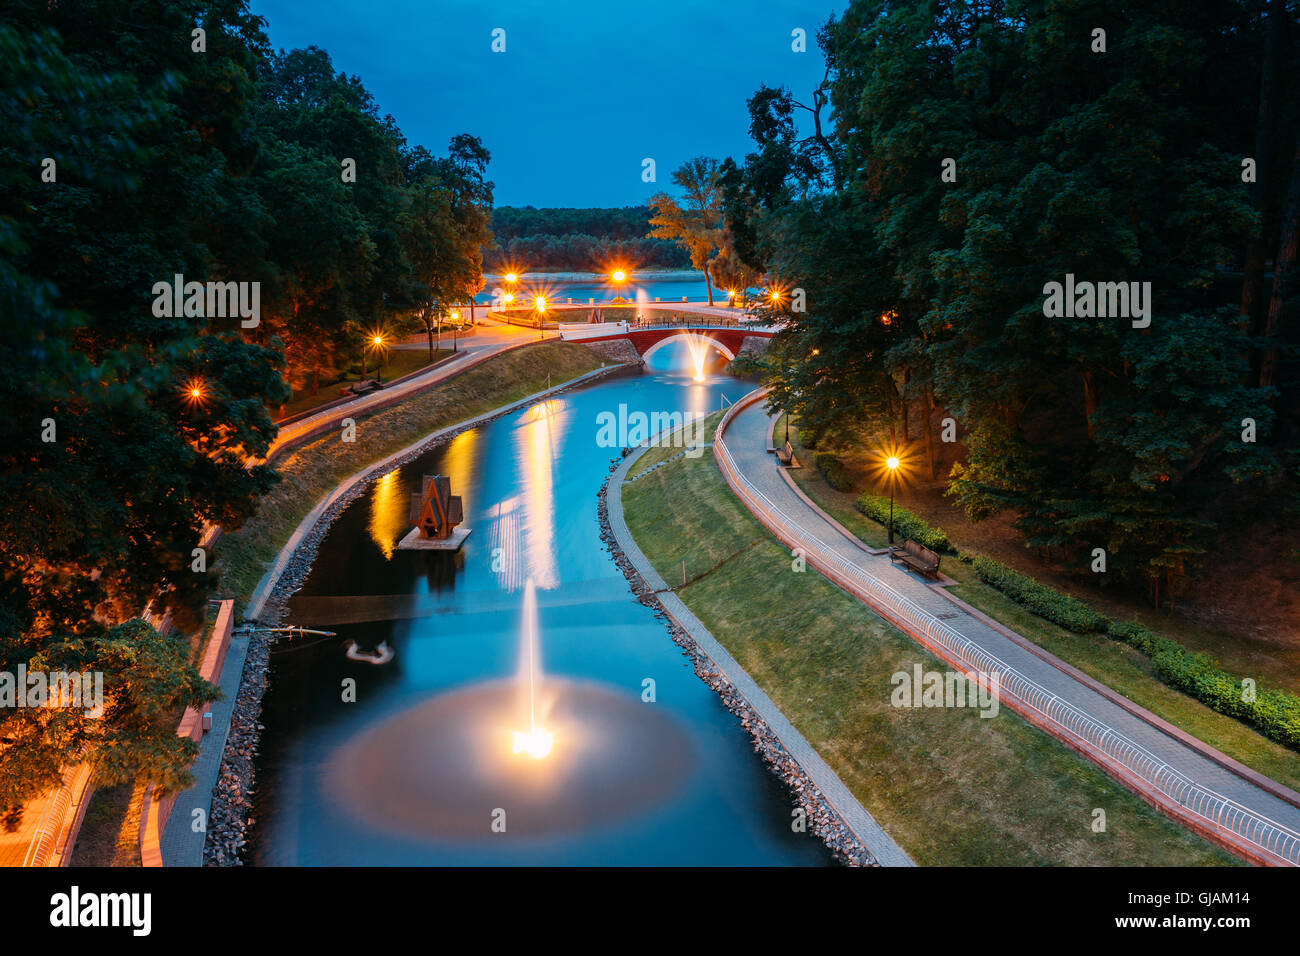 The Scenic View Of Park Watercourse Channel Flowing Into The River Through Stone Bridge. Lighted Walkways, Greenwood Along The W Stock Photo